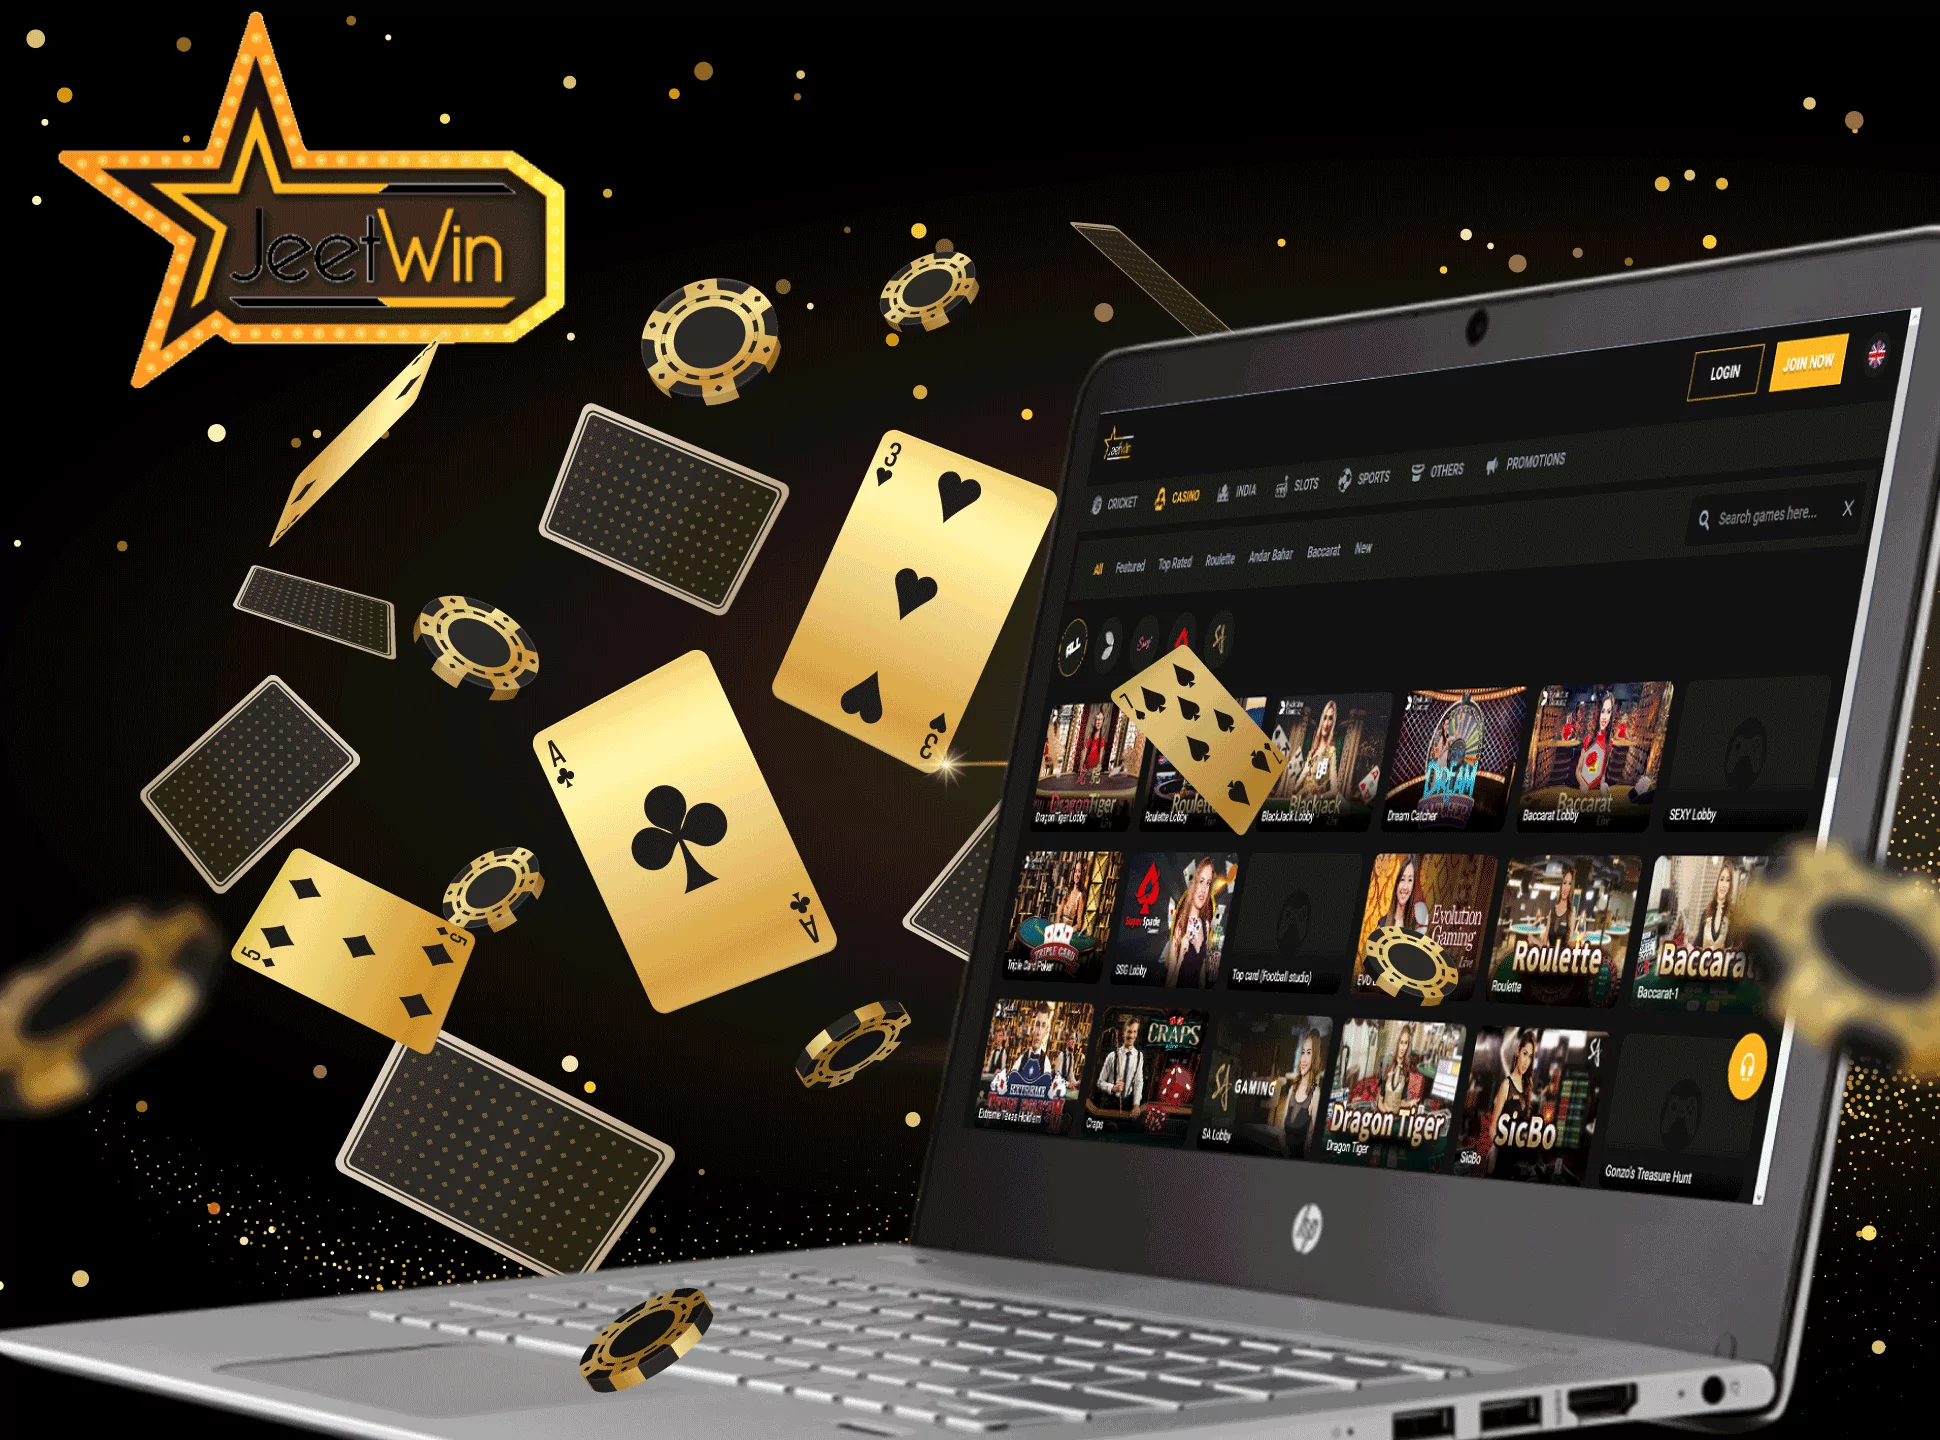 Try the Jeetwin online casino with lots of gambilng entertainments.